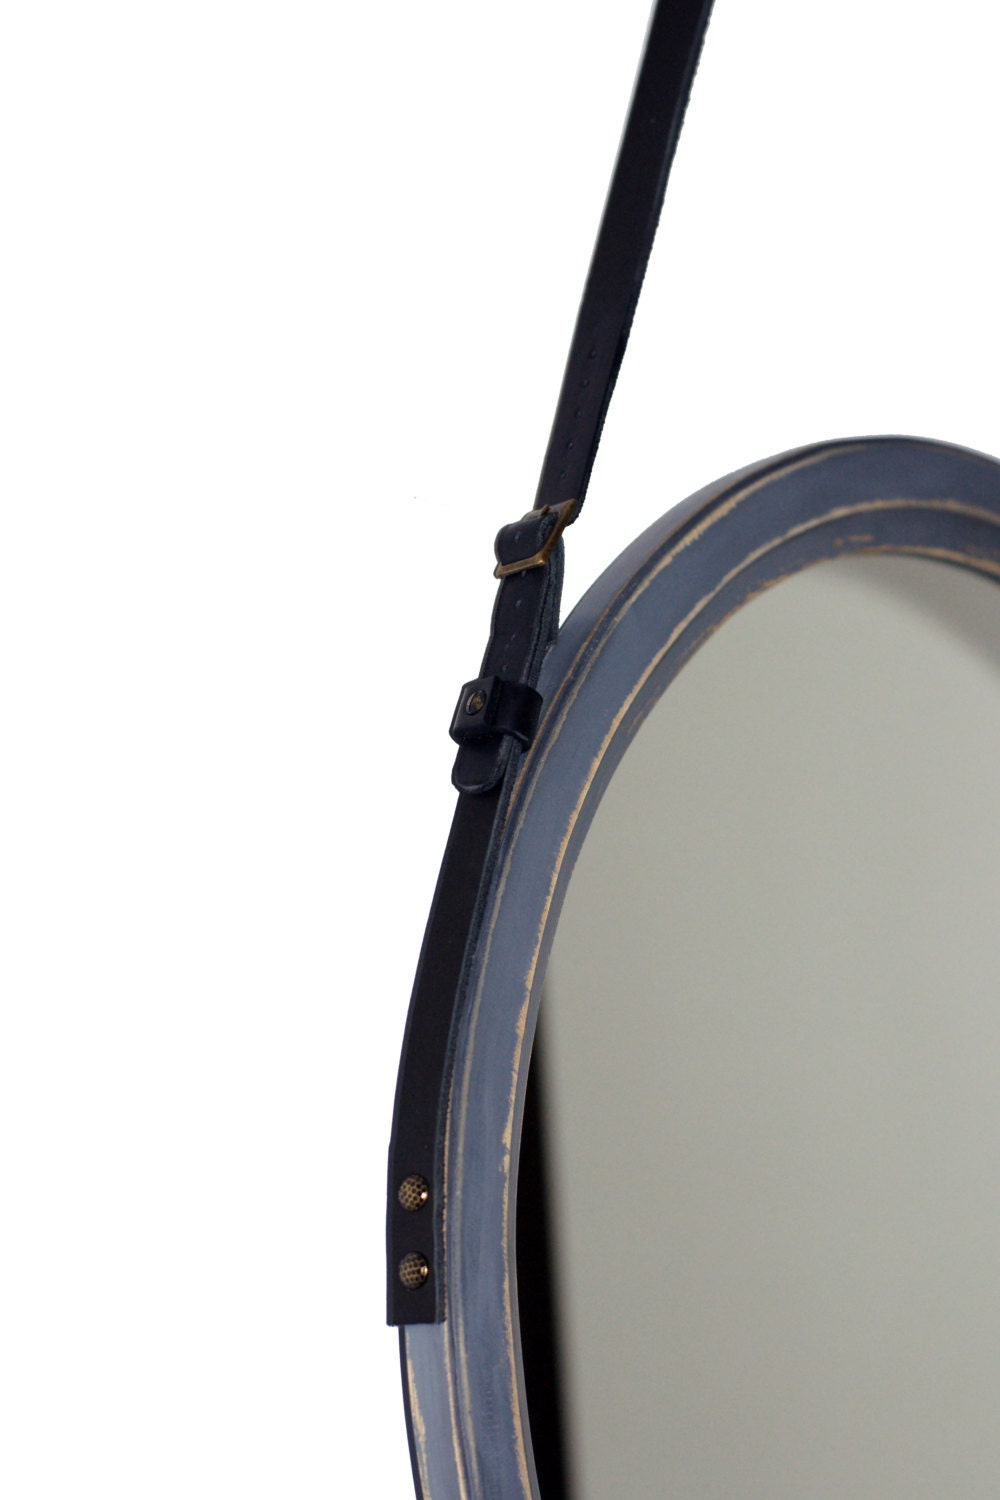 Round Mirror for bathroom, Wood large mirror, Decorative mirror for wall,  Modern mirror for living room, Leather strap hanging mirror "Rio"